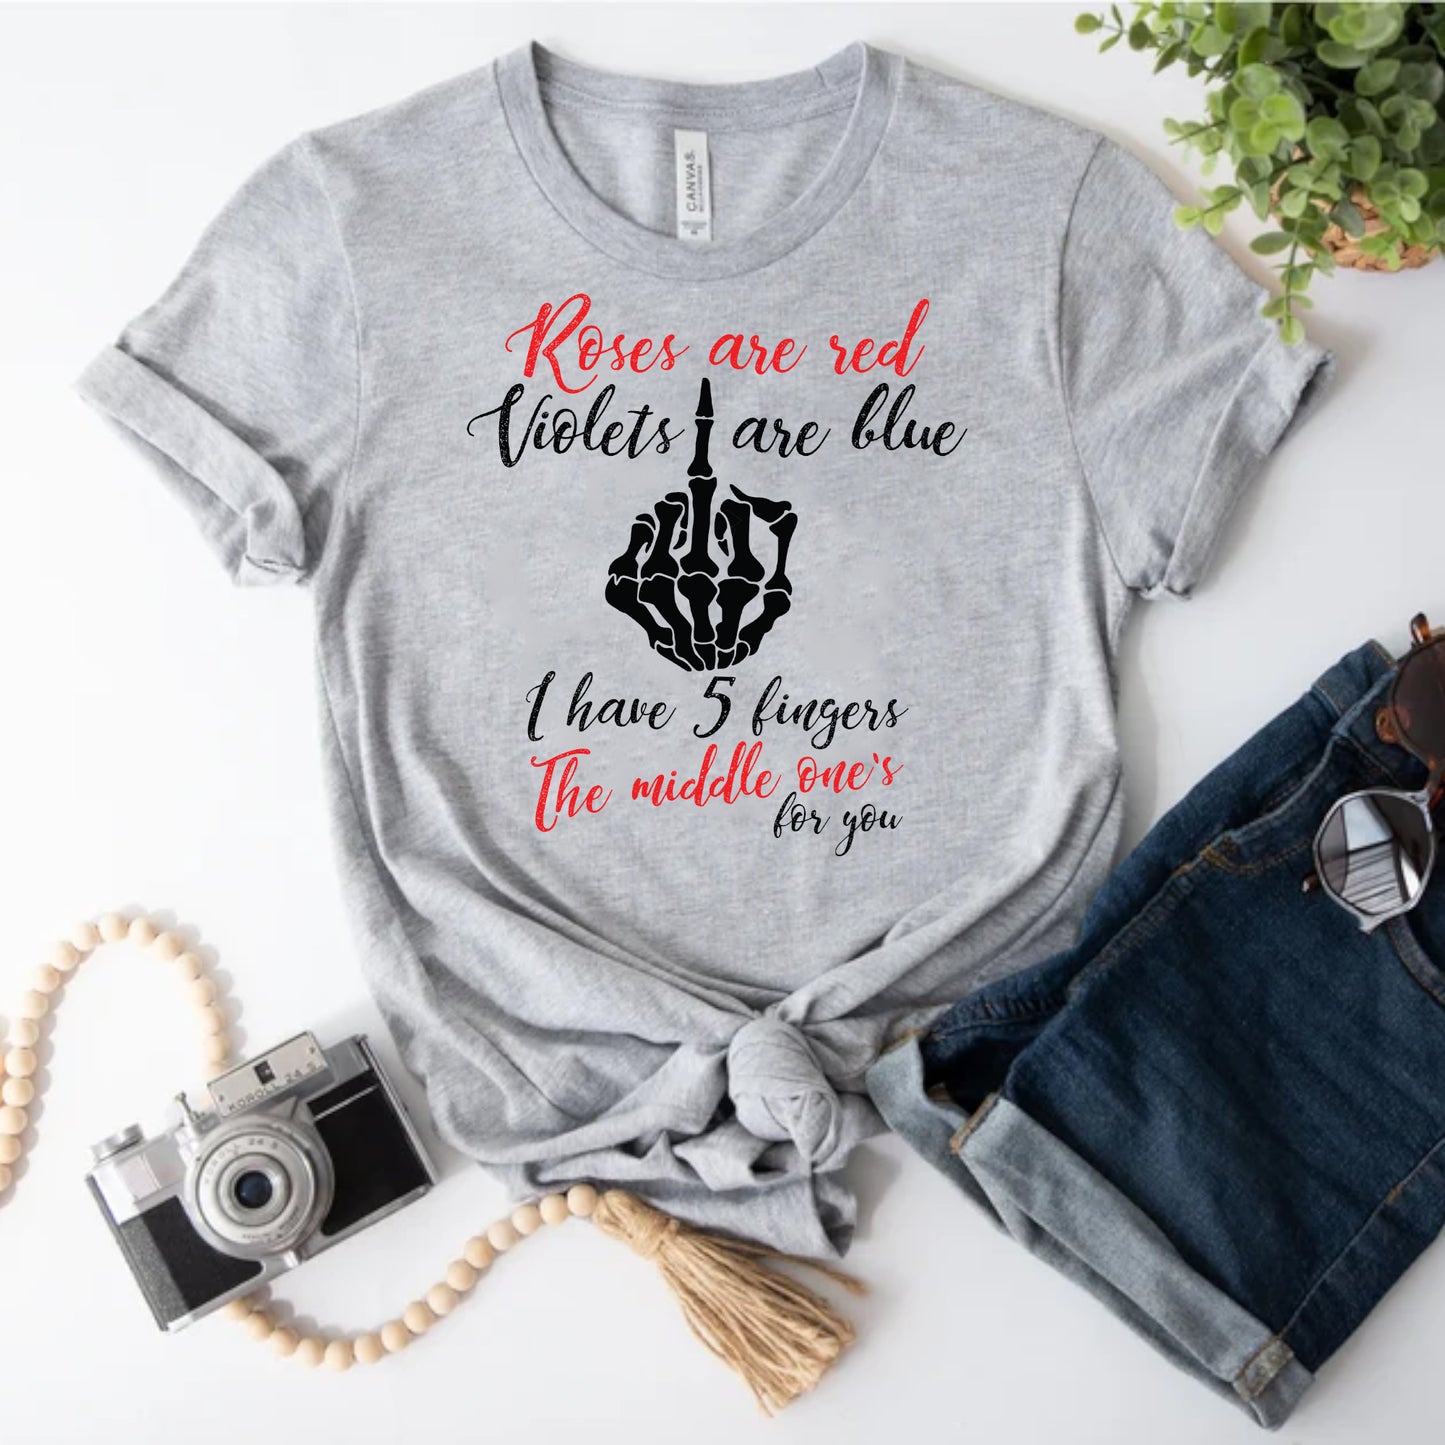 Roses are Red, Violets are blue,I have 5 fingers,the middle one's for you Tshirt, Funny Galentines Day,Anti Valentines Day, Funny Valentines